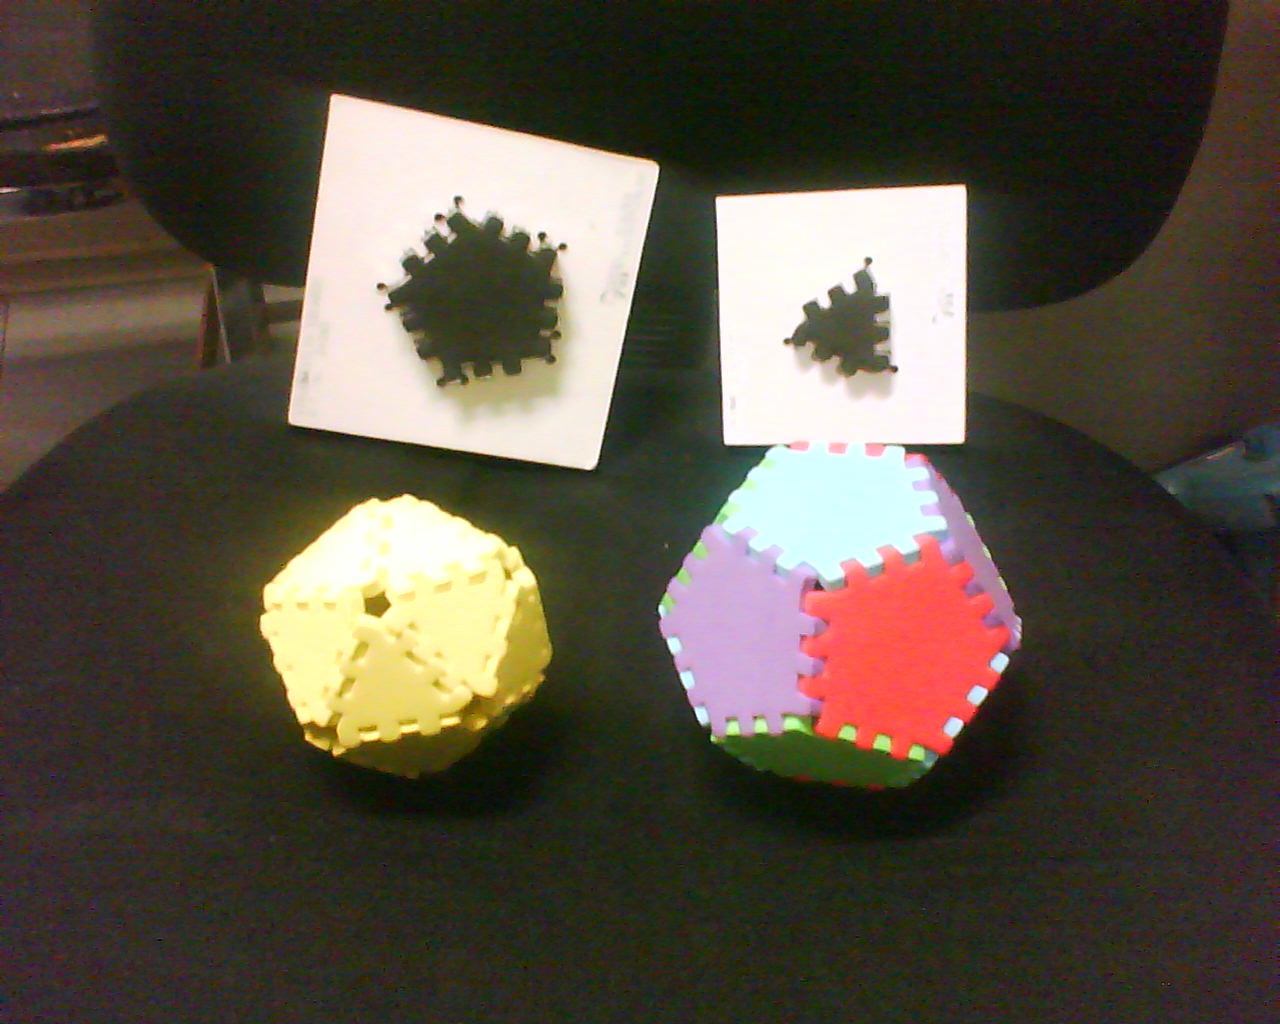 icosahedron and dodecahedron 05